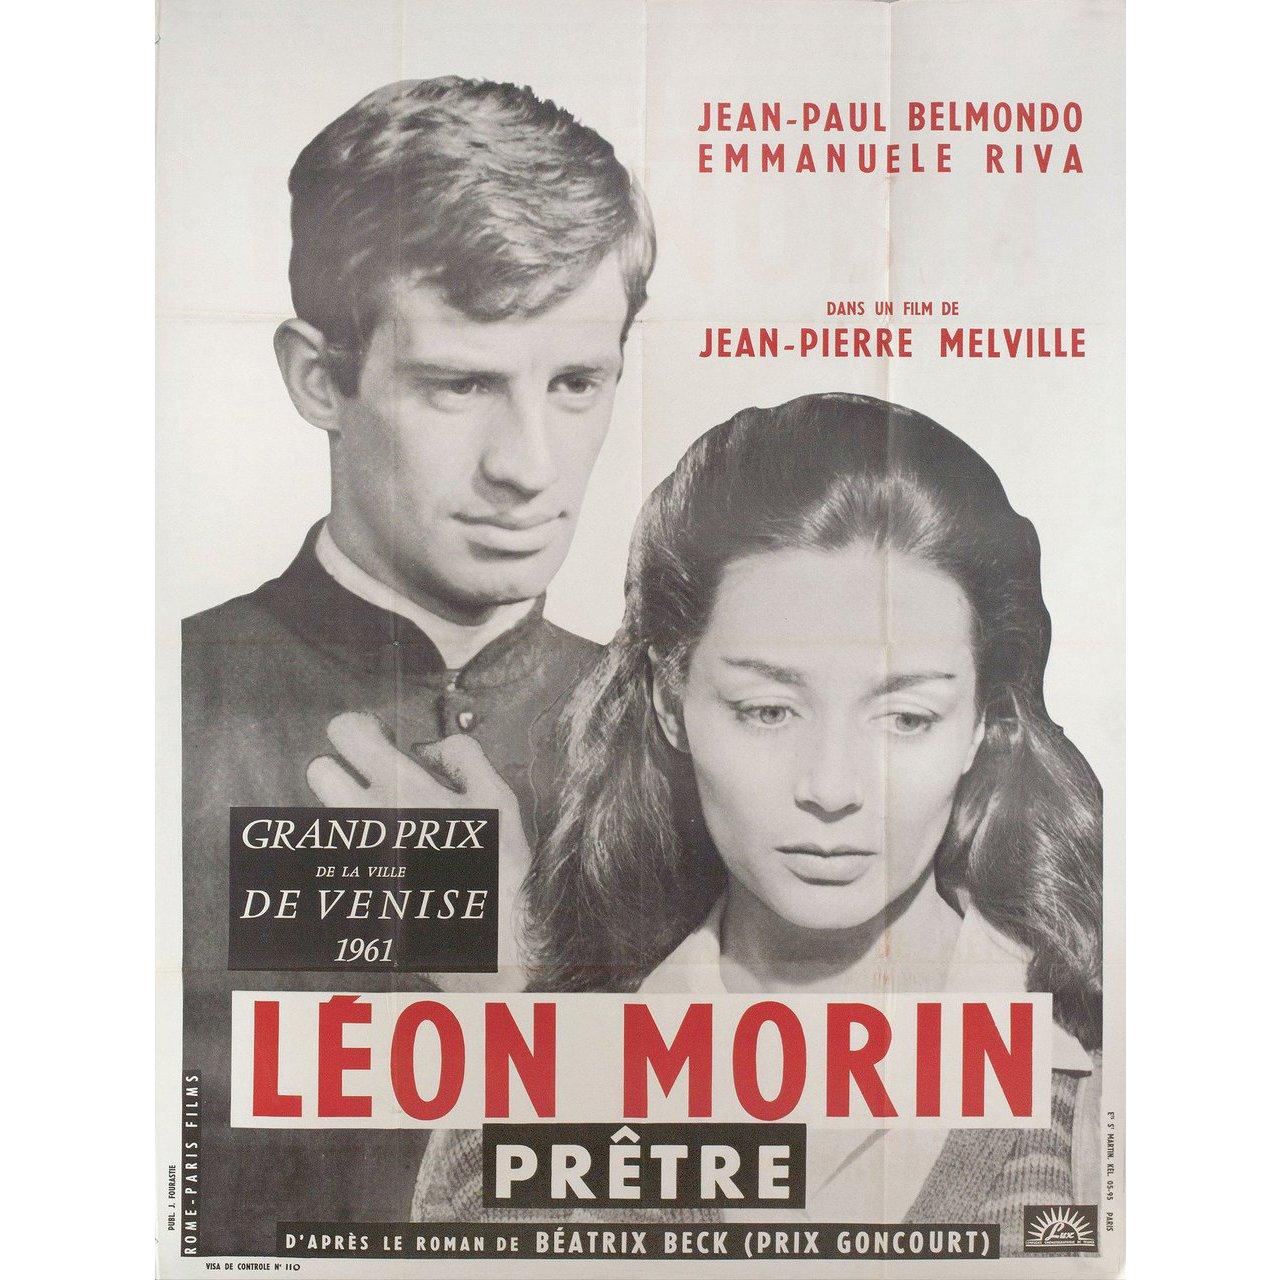 Original 1961 French grande poster by Jacques Fourastie for the film Leon Morin, Priest (Leon Morin, pretre) directed by Jean-Pierre Melville with Jean-Paul Belmondo / Emmanuelle Riva / Irene Tunc / Nicole Mirel. Very good-fine condition, folded.